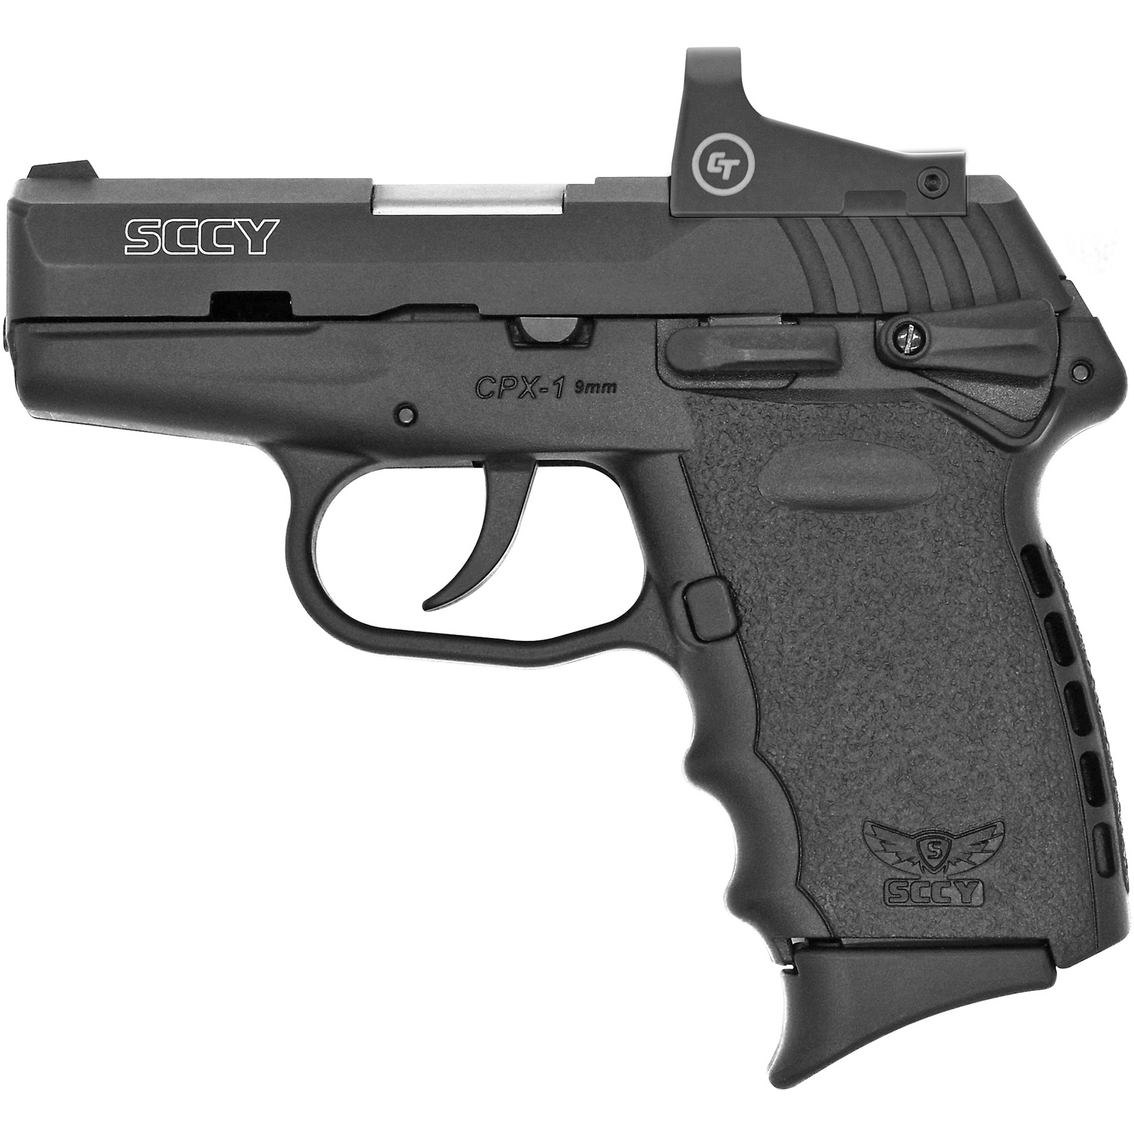 Sccy CPX1 9mm 3.1 in. Barrel with Red Dot Sight 10 Round Pistol